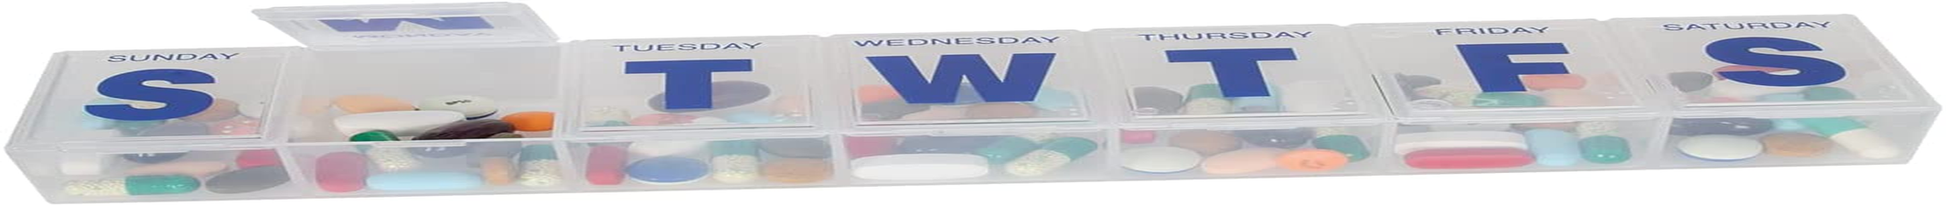 Ezy Dose Weekly (7-Day) Pill Organizer, Vitamin Case, and Medicine Box, Small Compartments, Color May Vary